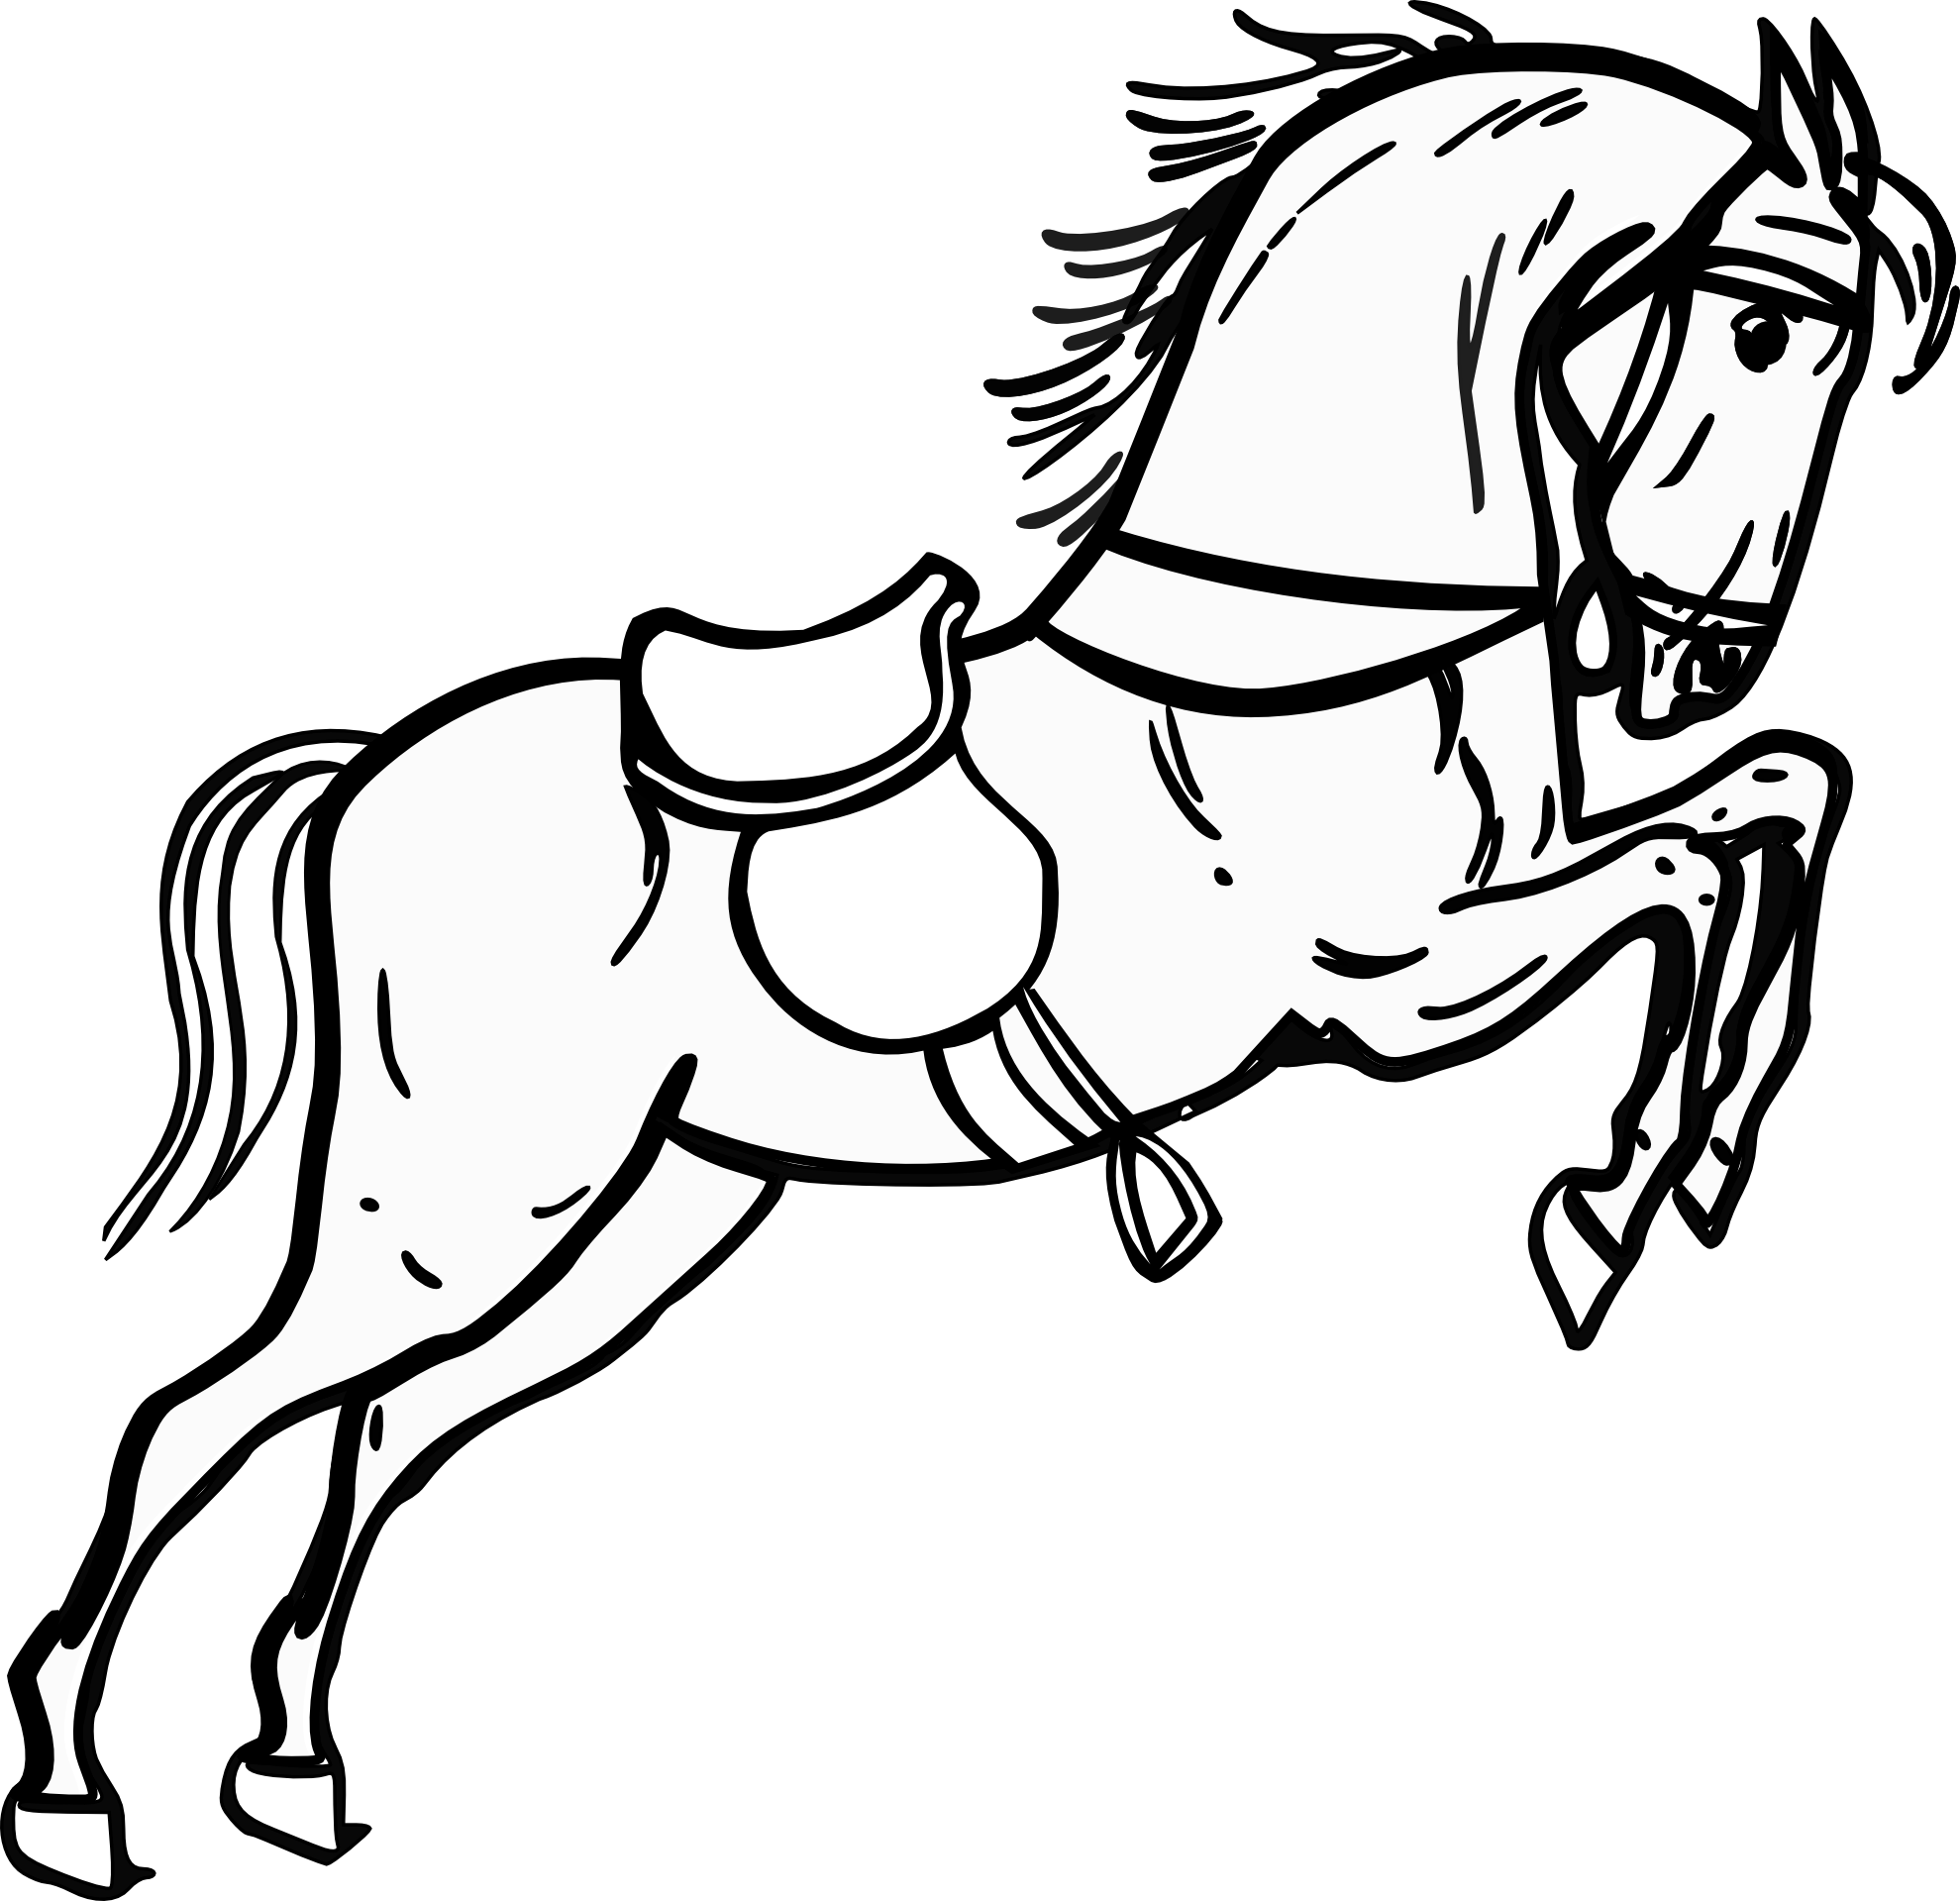 Images For > Horse Black And White Clipart Running